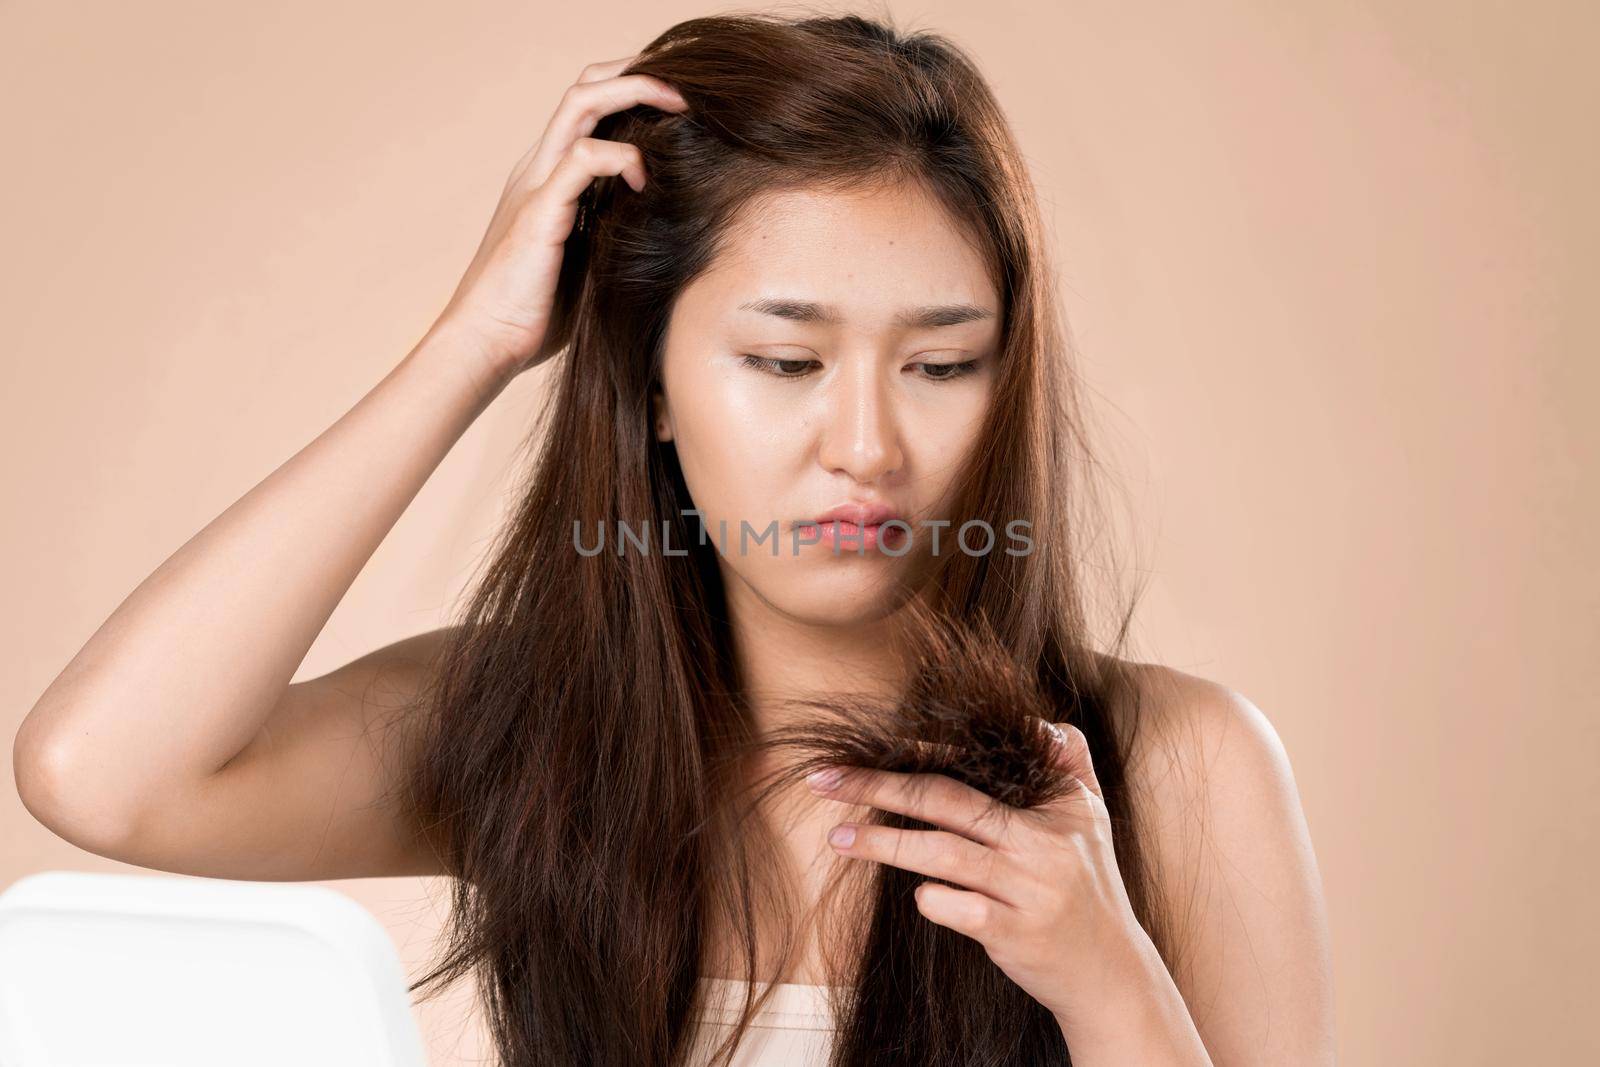 Ardent young girl feels insecure about her damaged hair. Beauty concept of brittle hair and how to treat it.